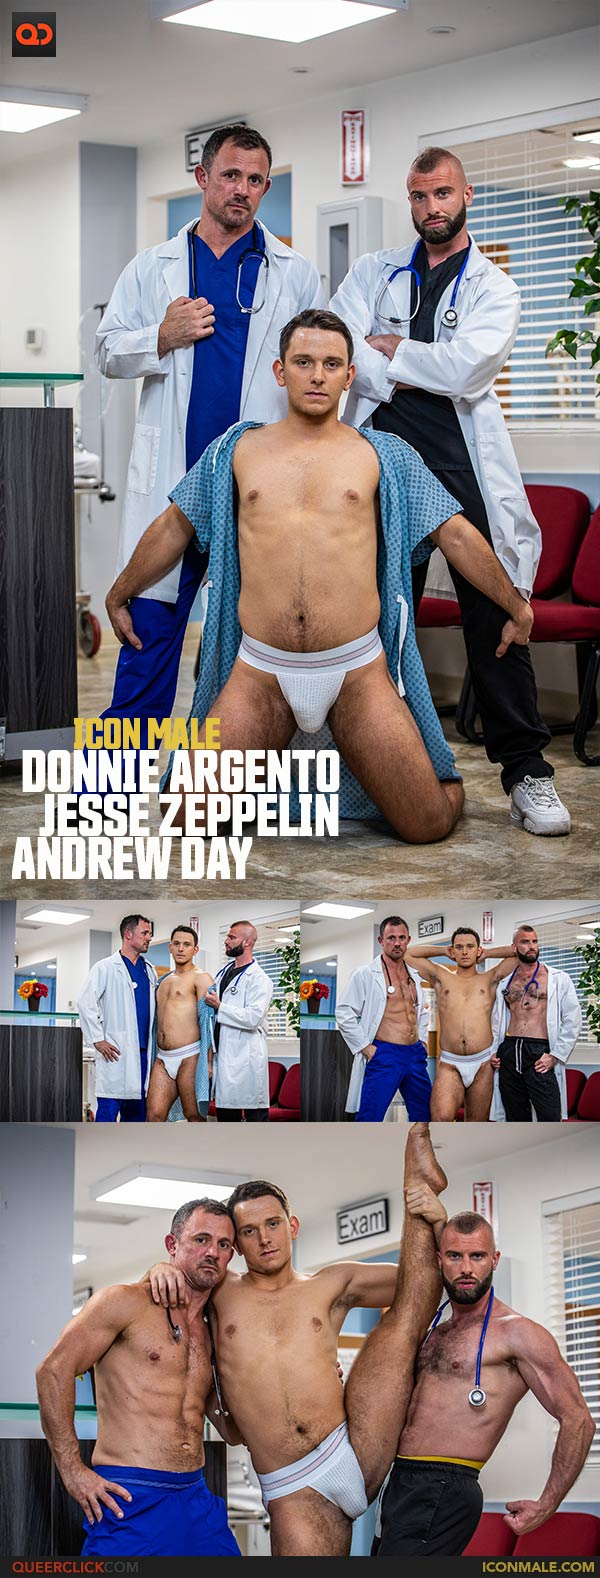 IconMale: Donnie Argento, Jesse Zeppelin and Andrew Day